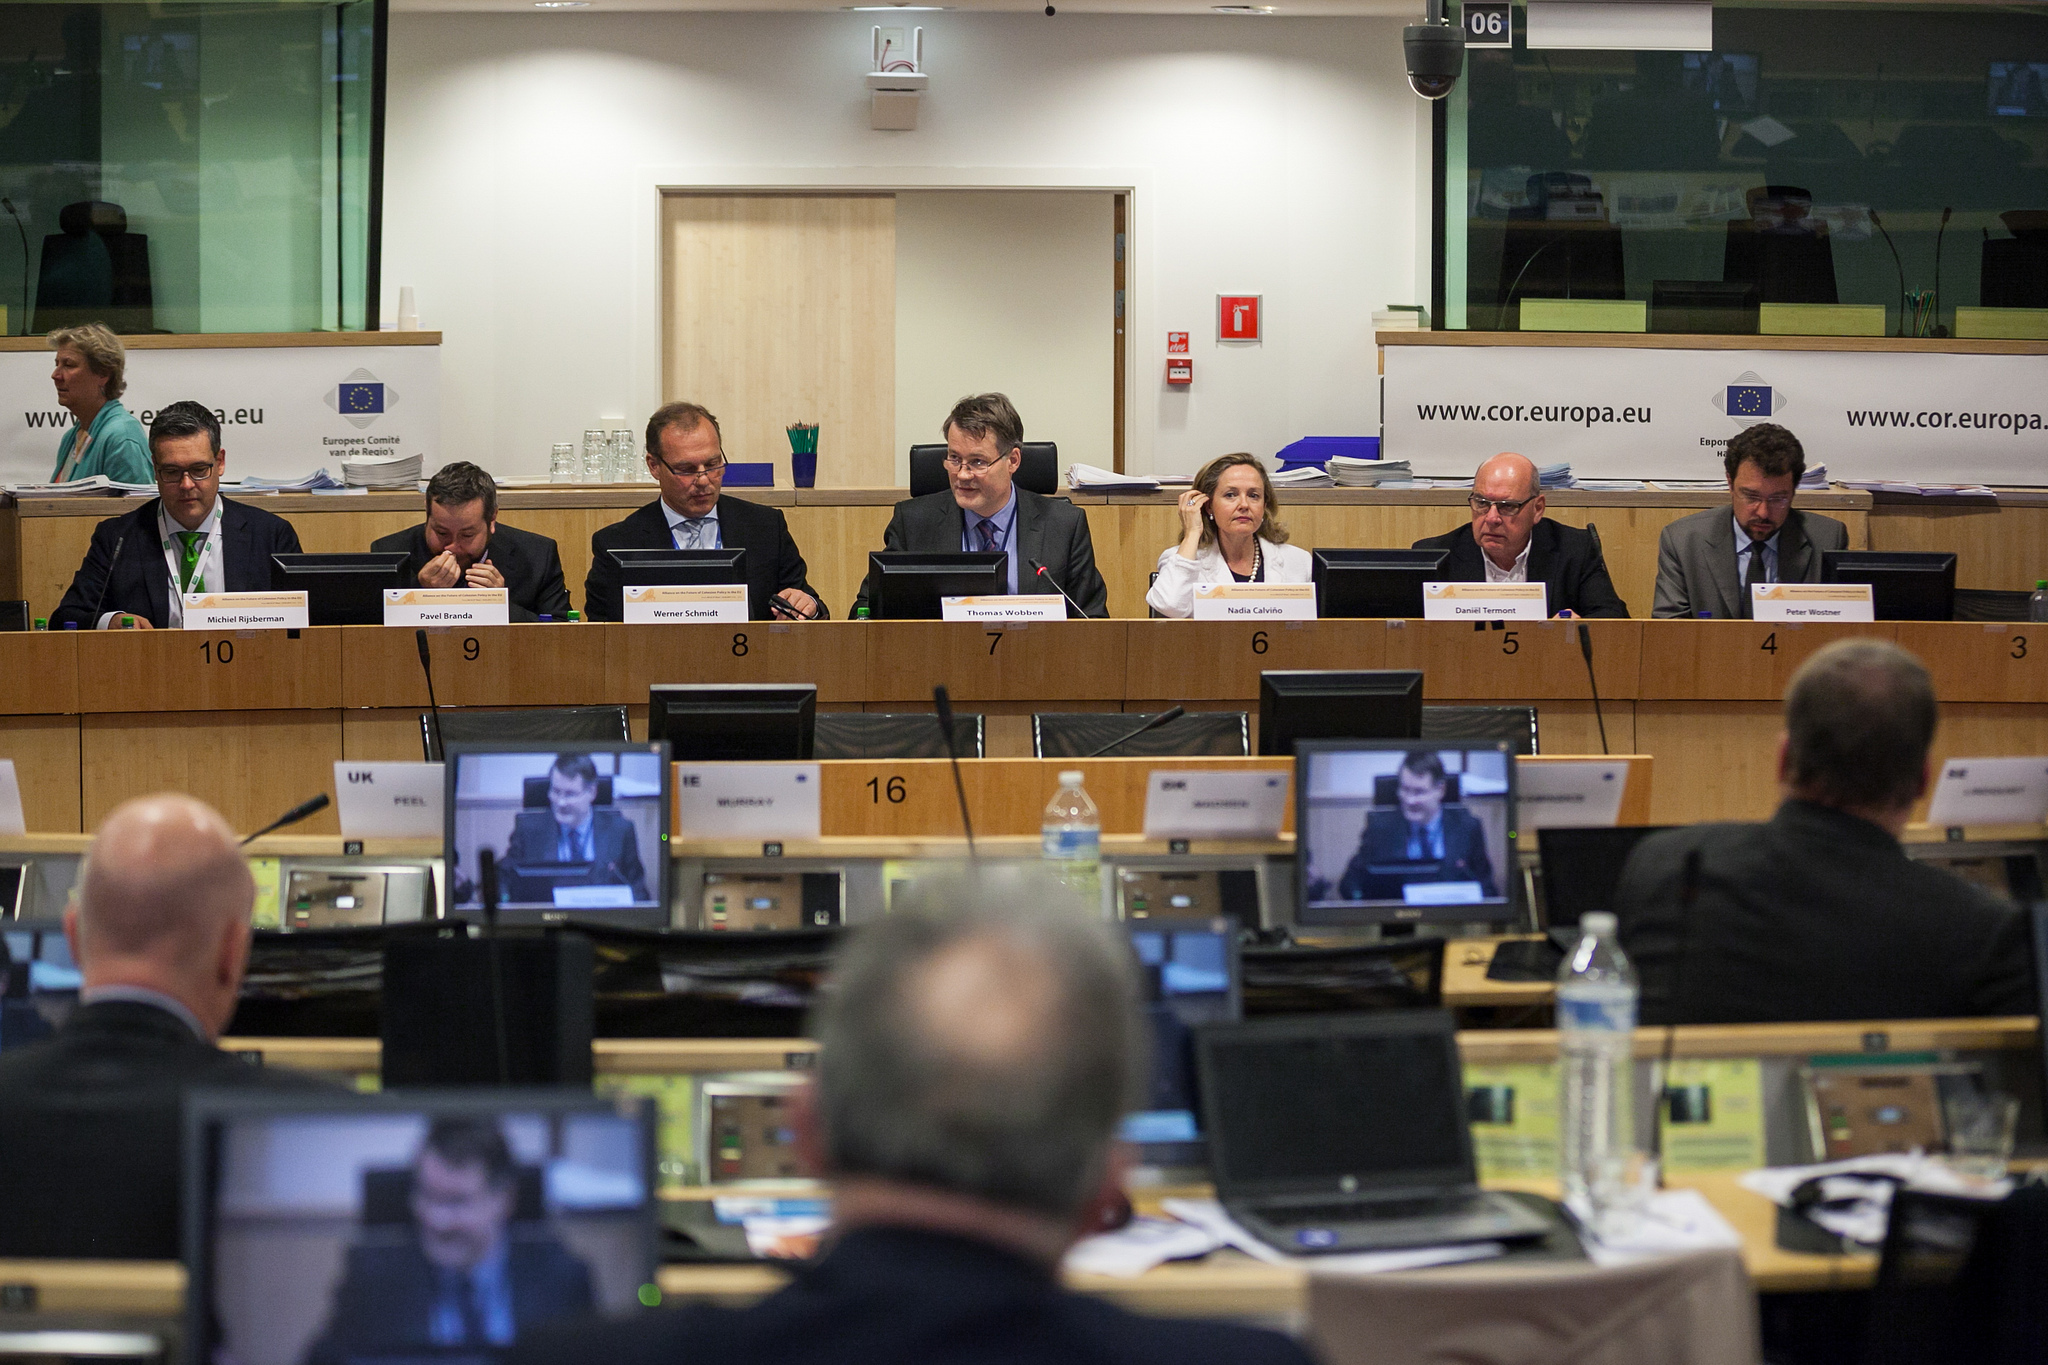 Alliance on the Future of Cohesion Policy in the EU